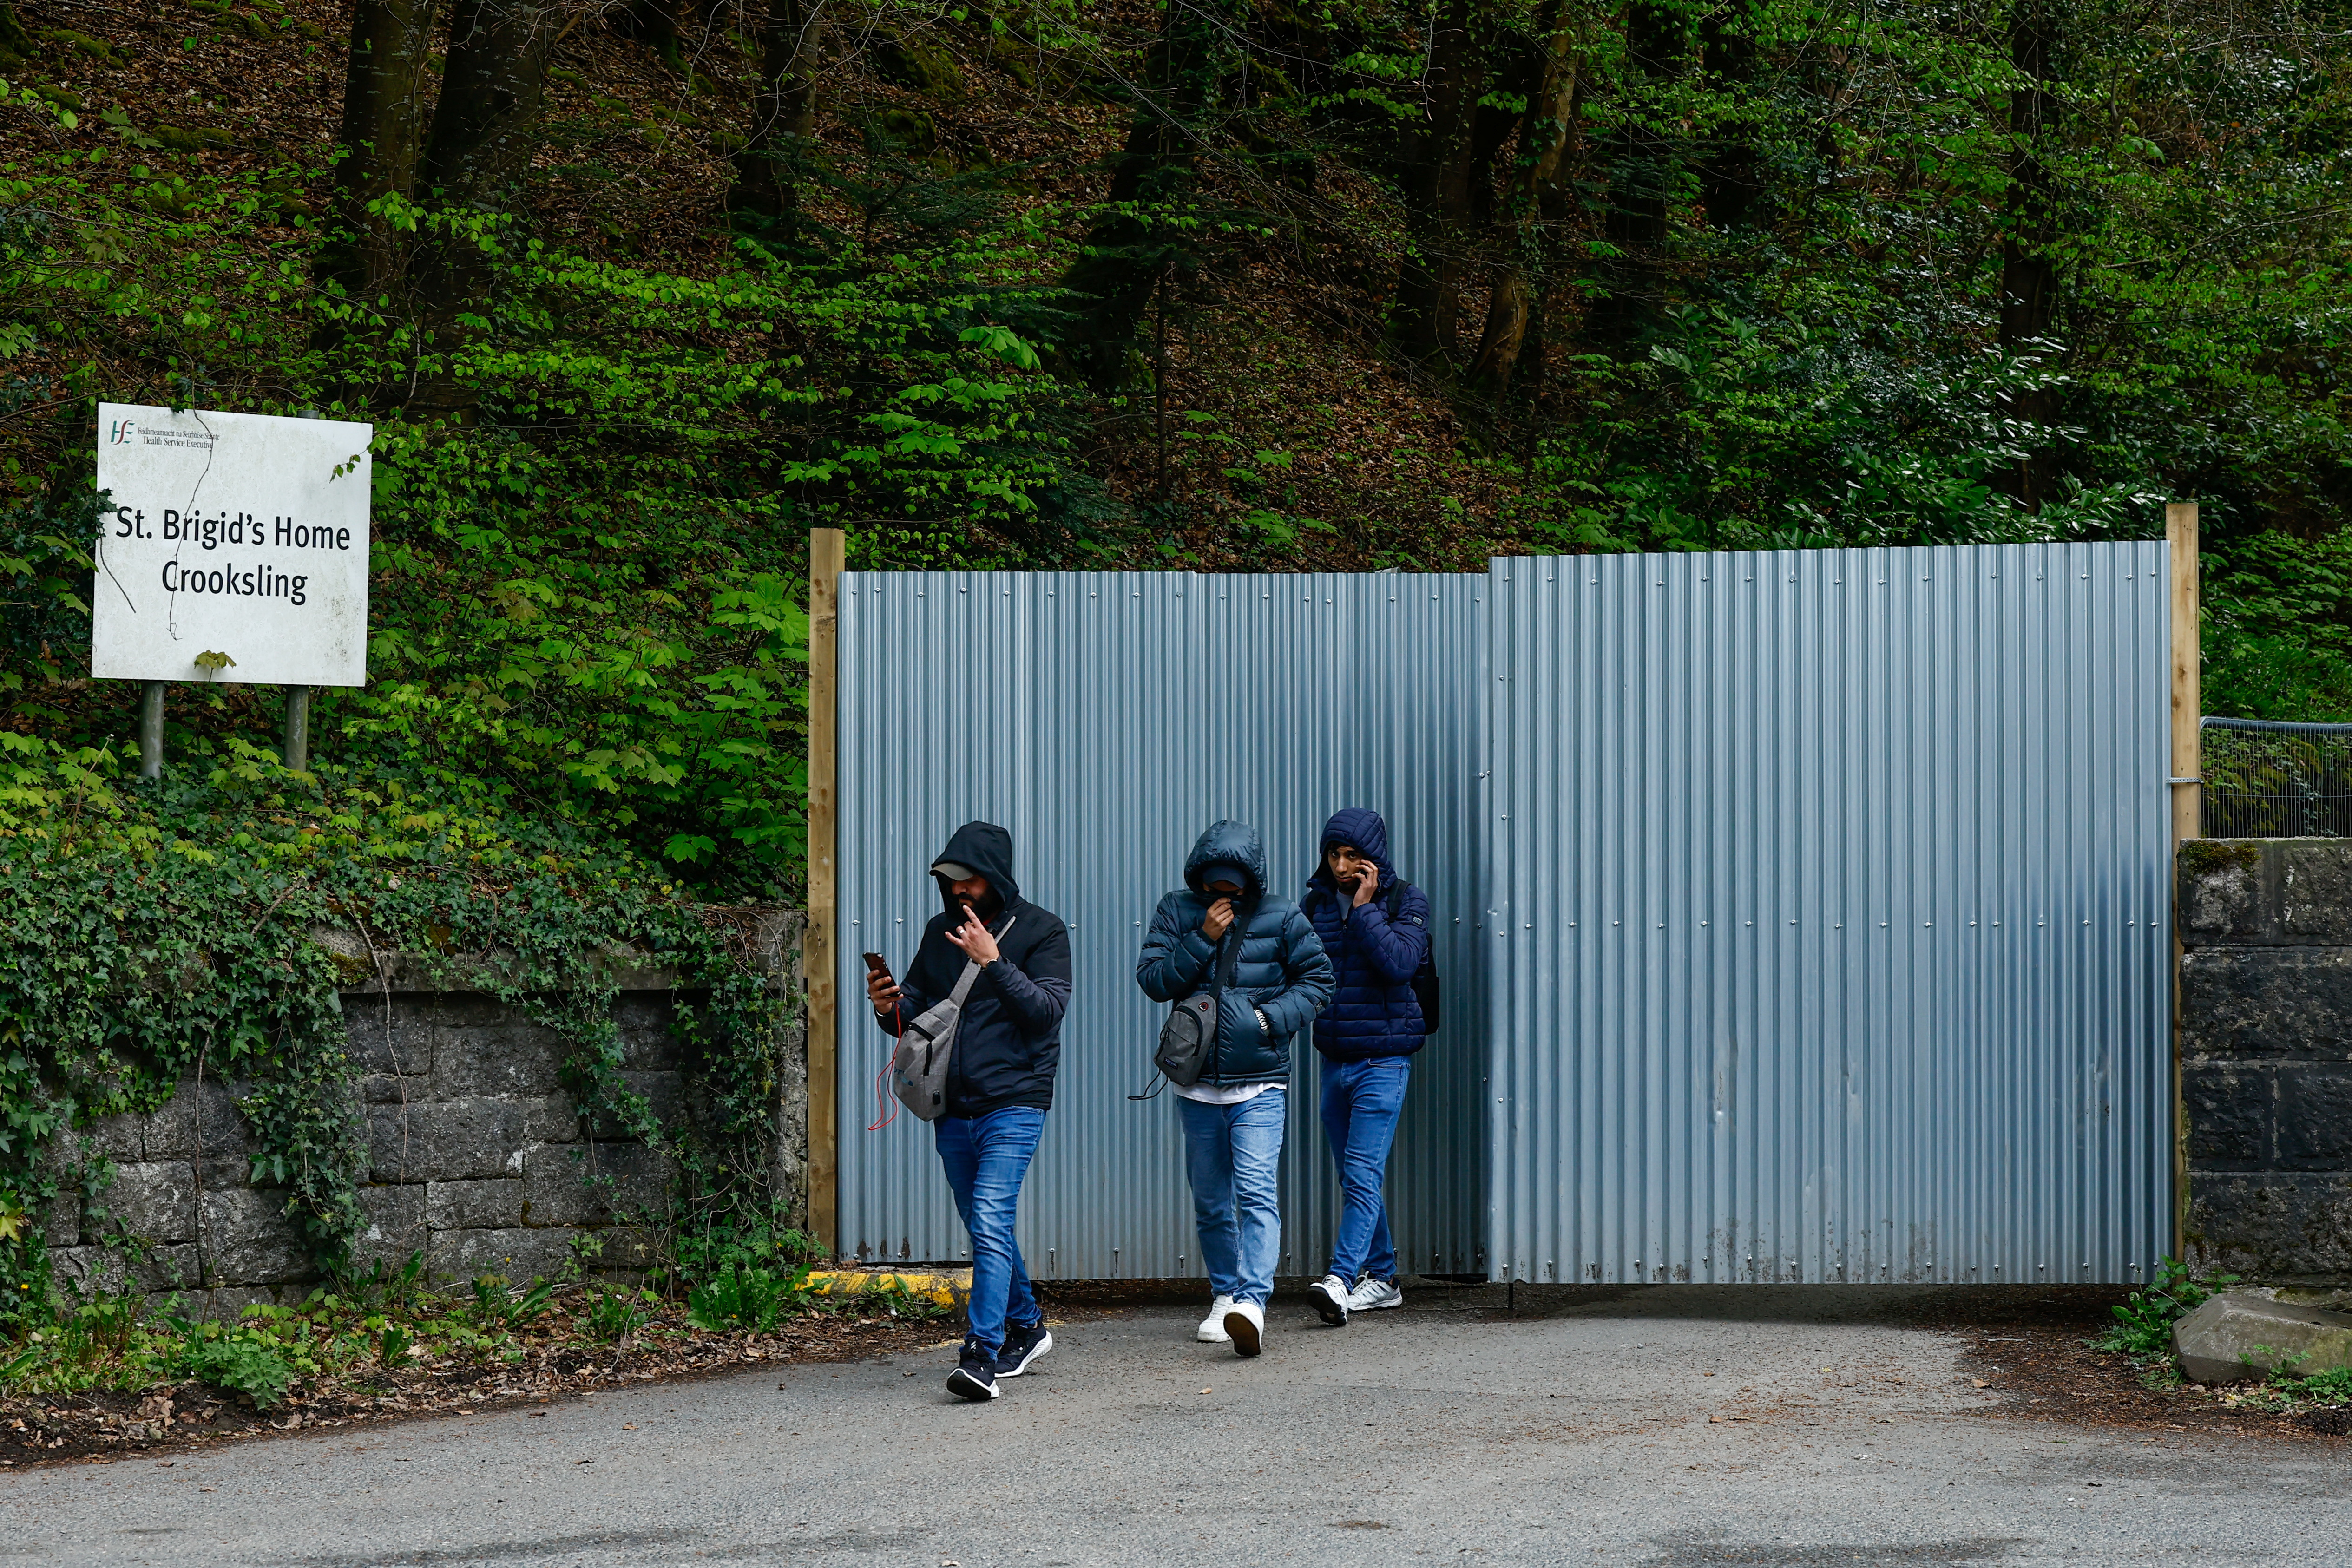 Asylum seekers walk past the gate of an IPAS tented accommodation service, in Crooksling